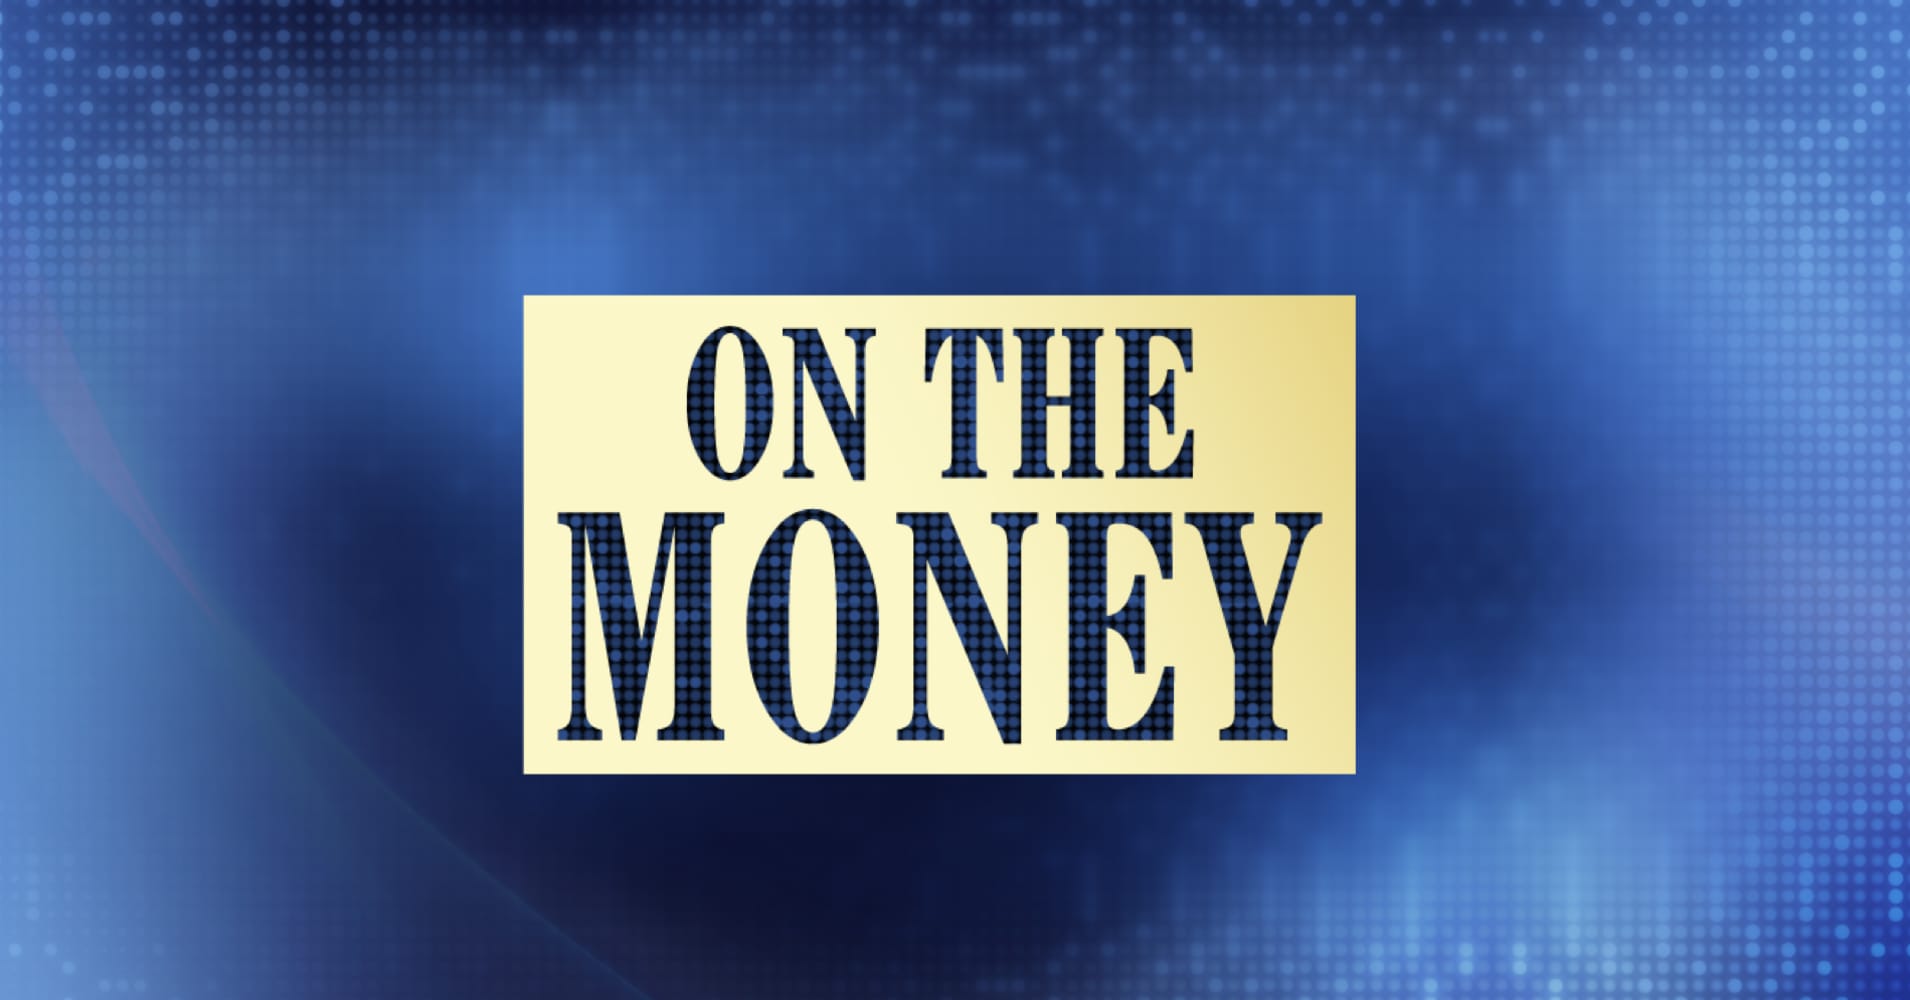 On the Money: Financial News and Information